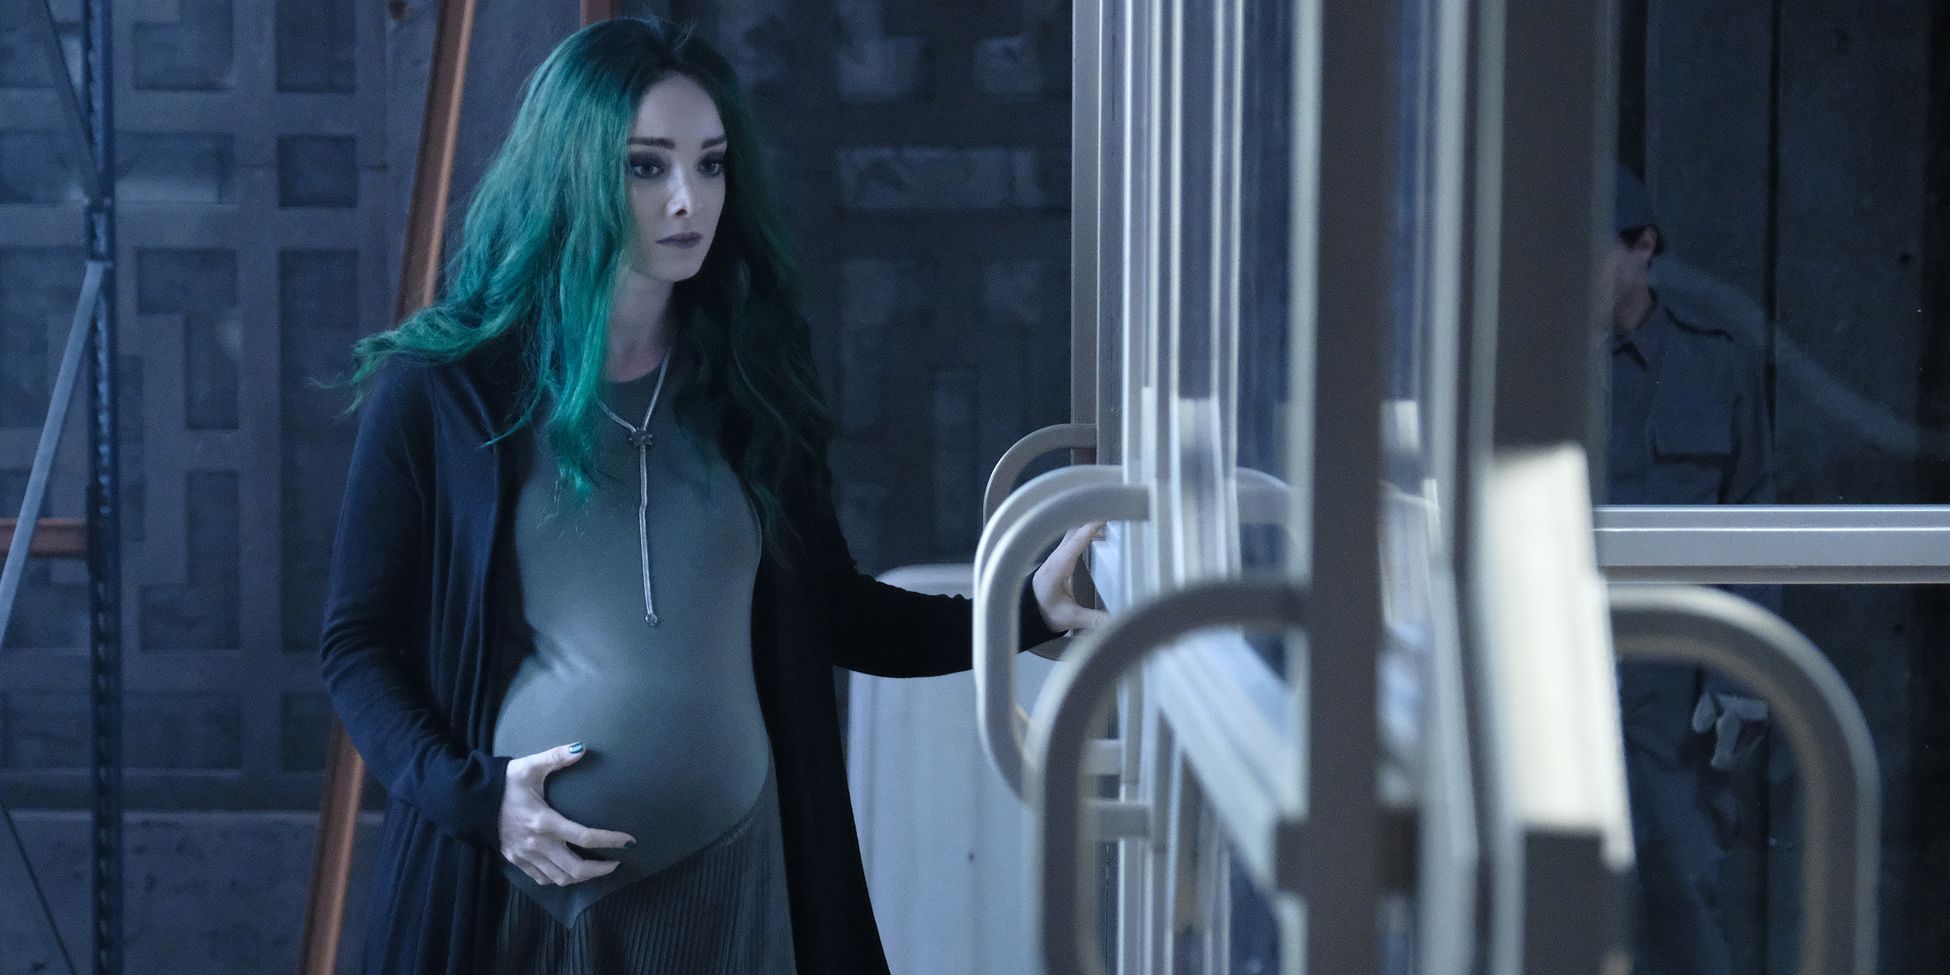 Emma Dumont in The Gifted Season 2